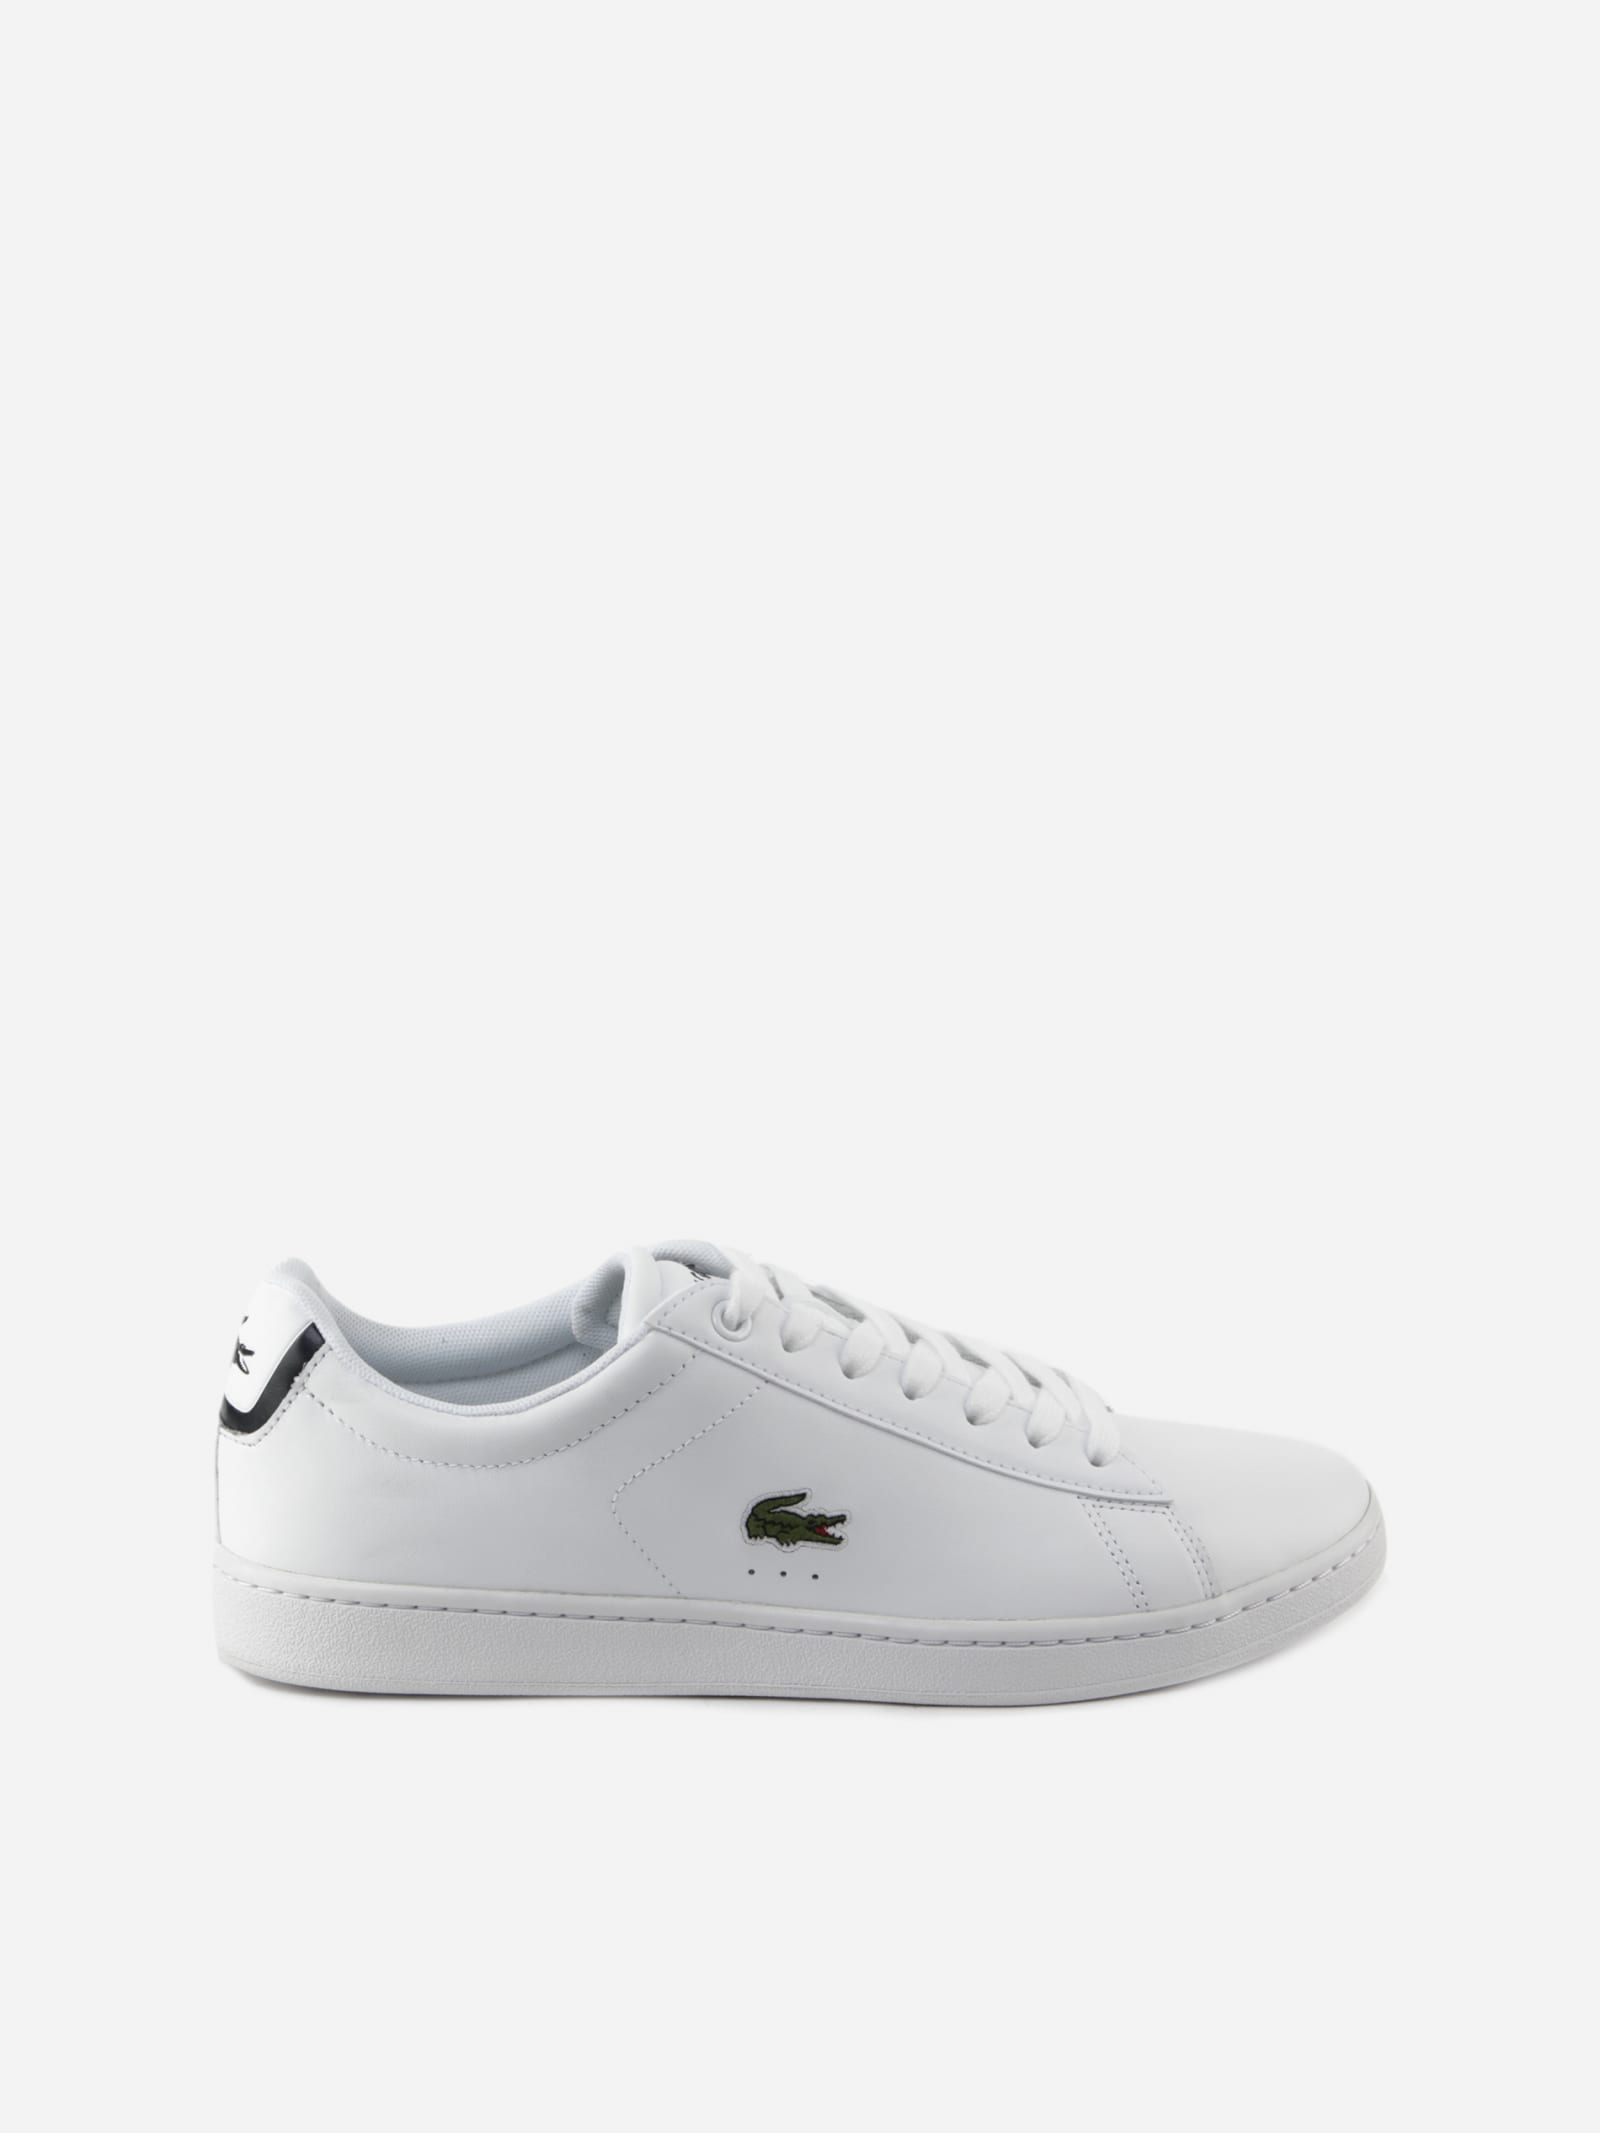 Lacoste Carnaby Evo Leather Sneakers